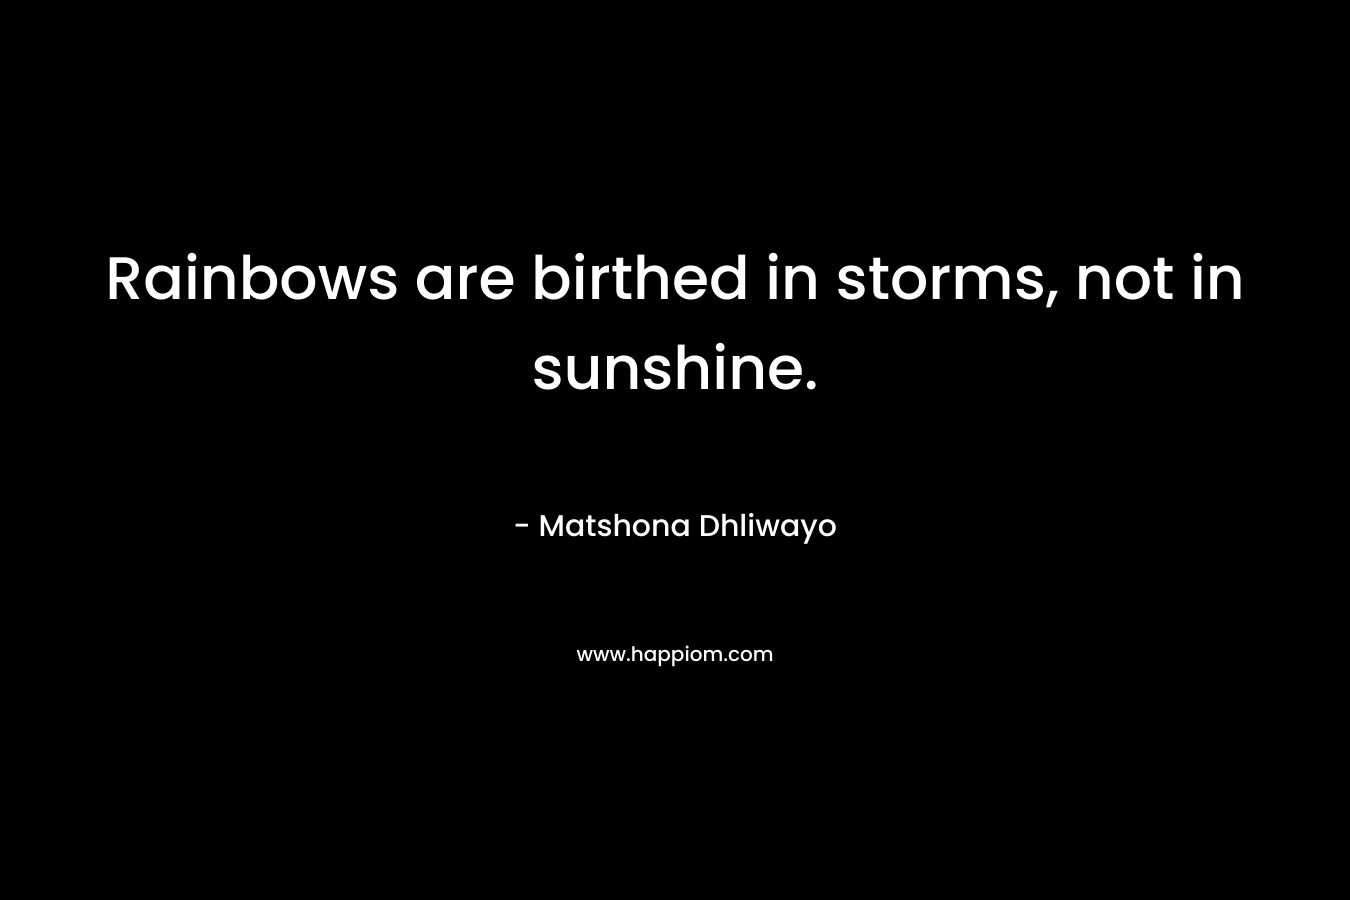 Rainbows are birthed in storms, not in sunshine. – Matshona Dhliwayo